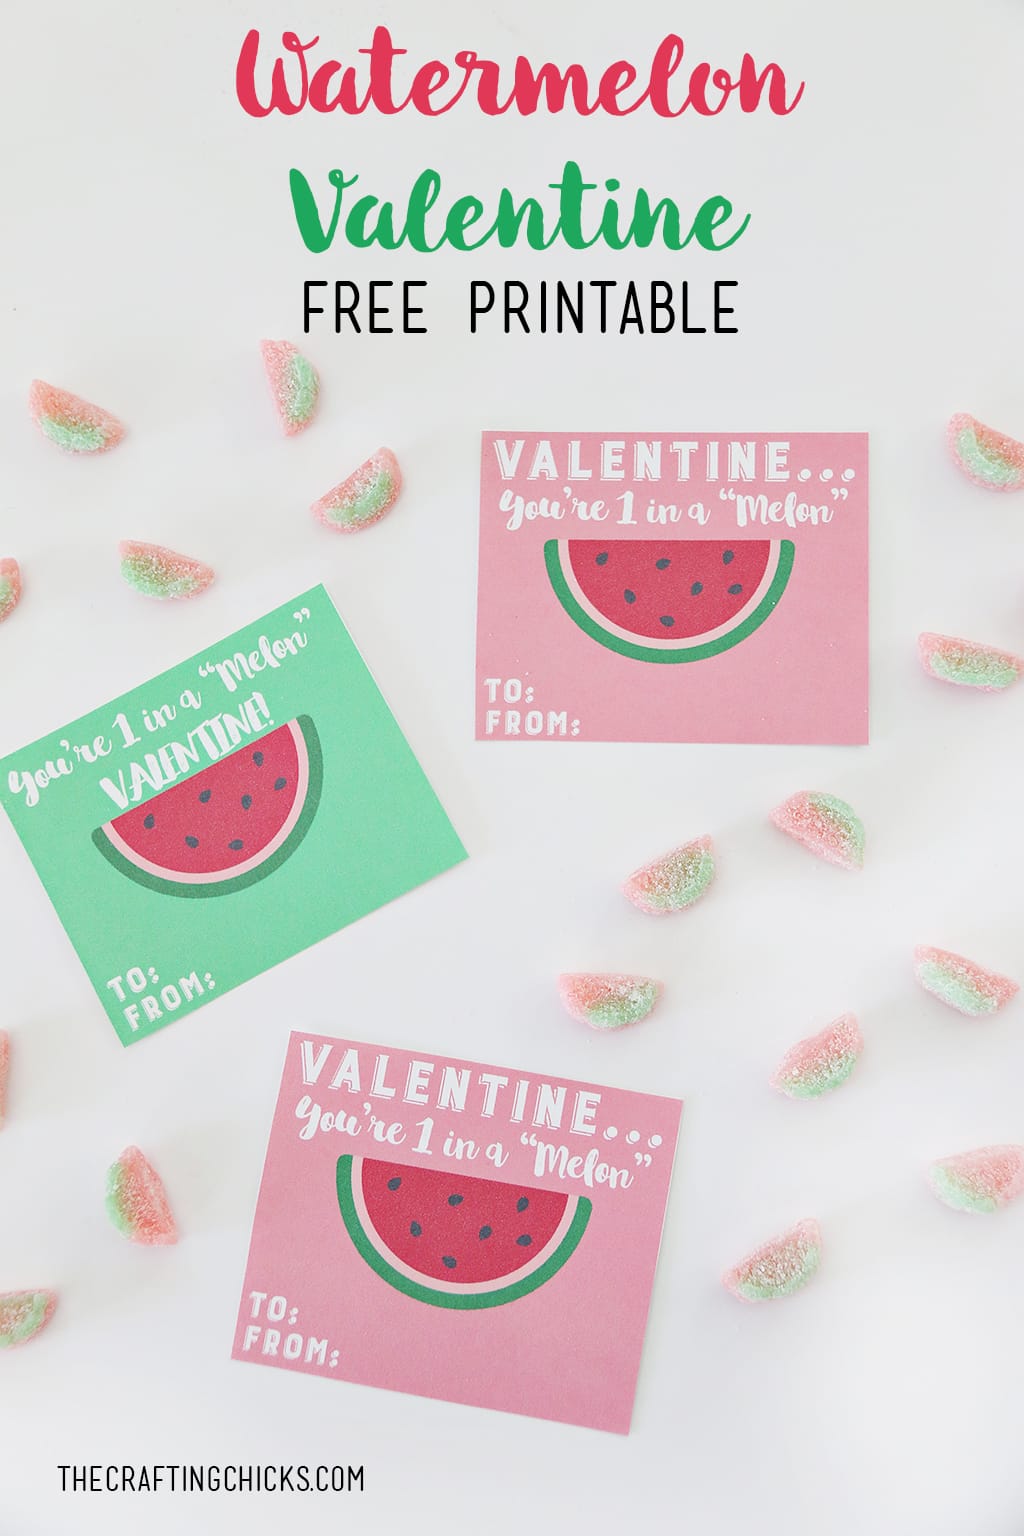 You're 1 in a "Melon" Valentine Printable | Simple printable Valentine to give to a friend, teacher or as class Valentines.